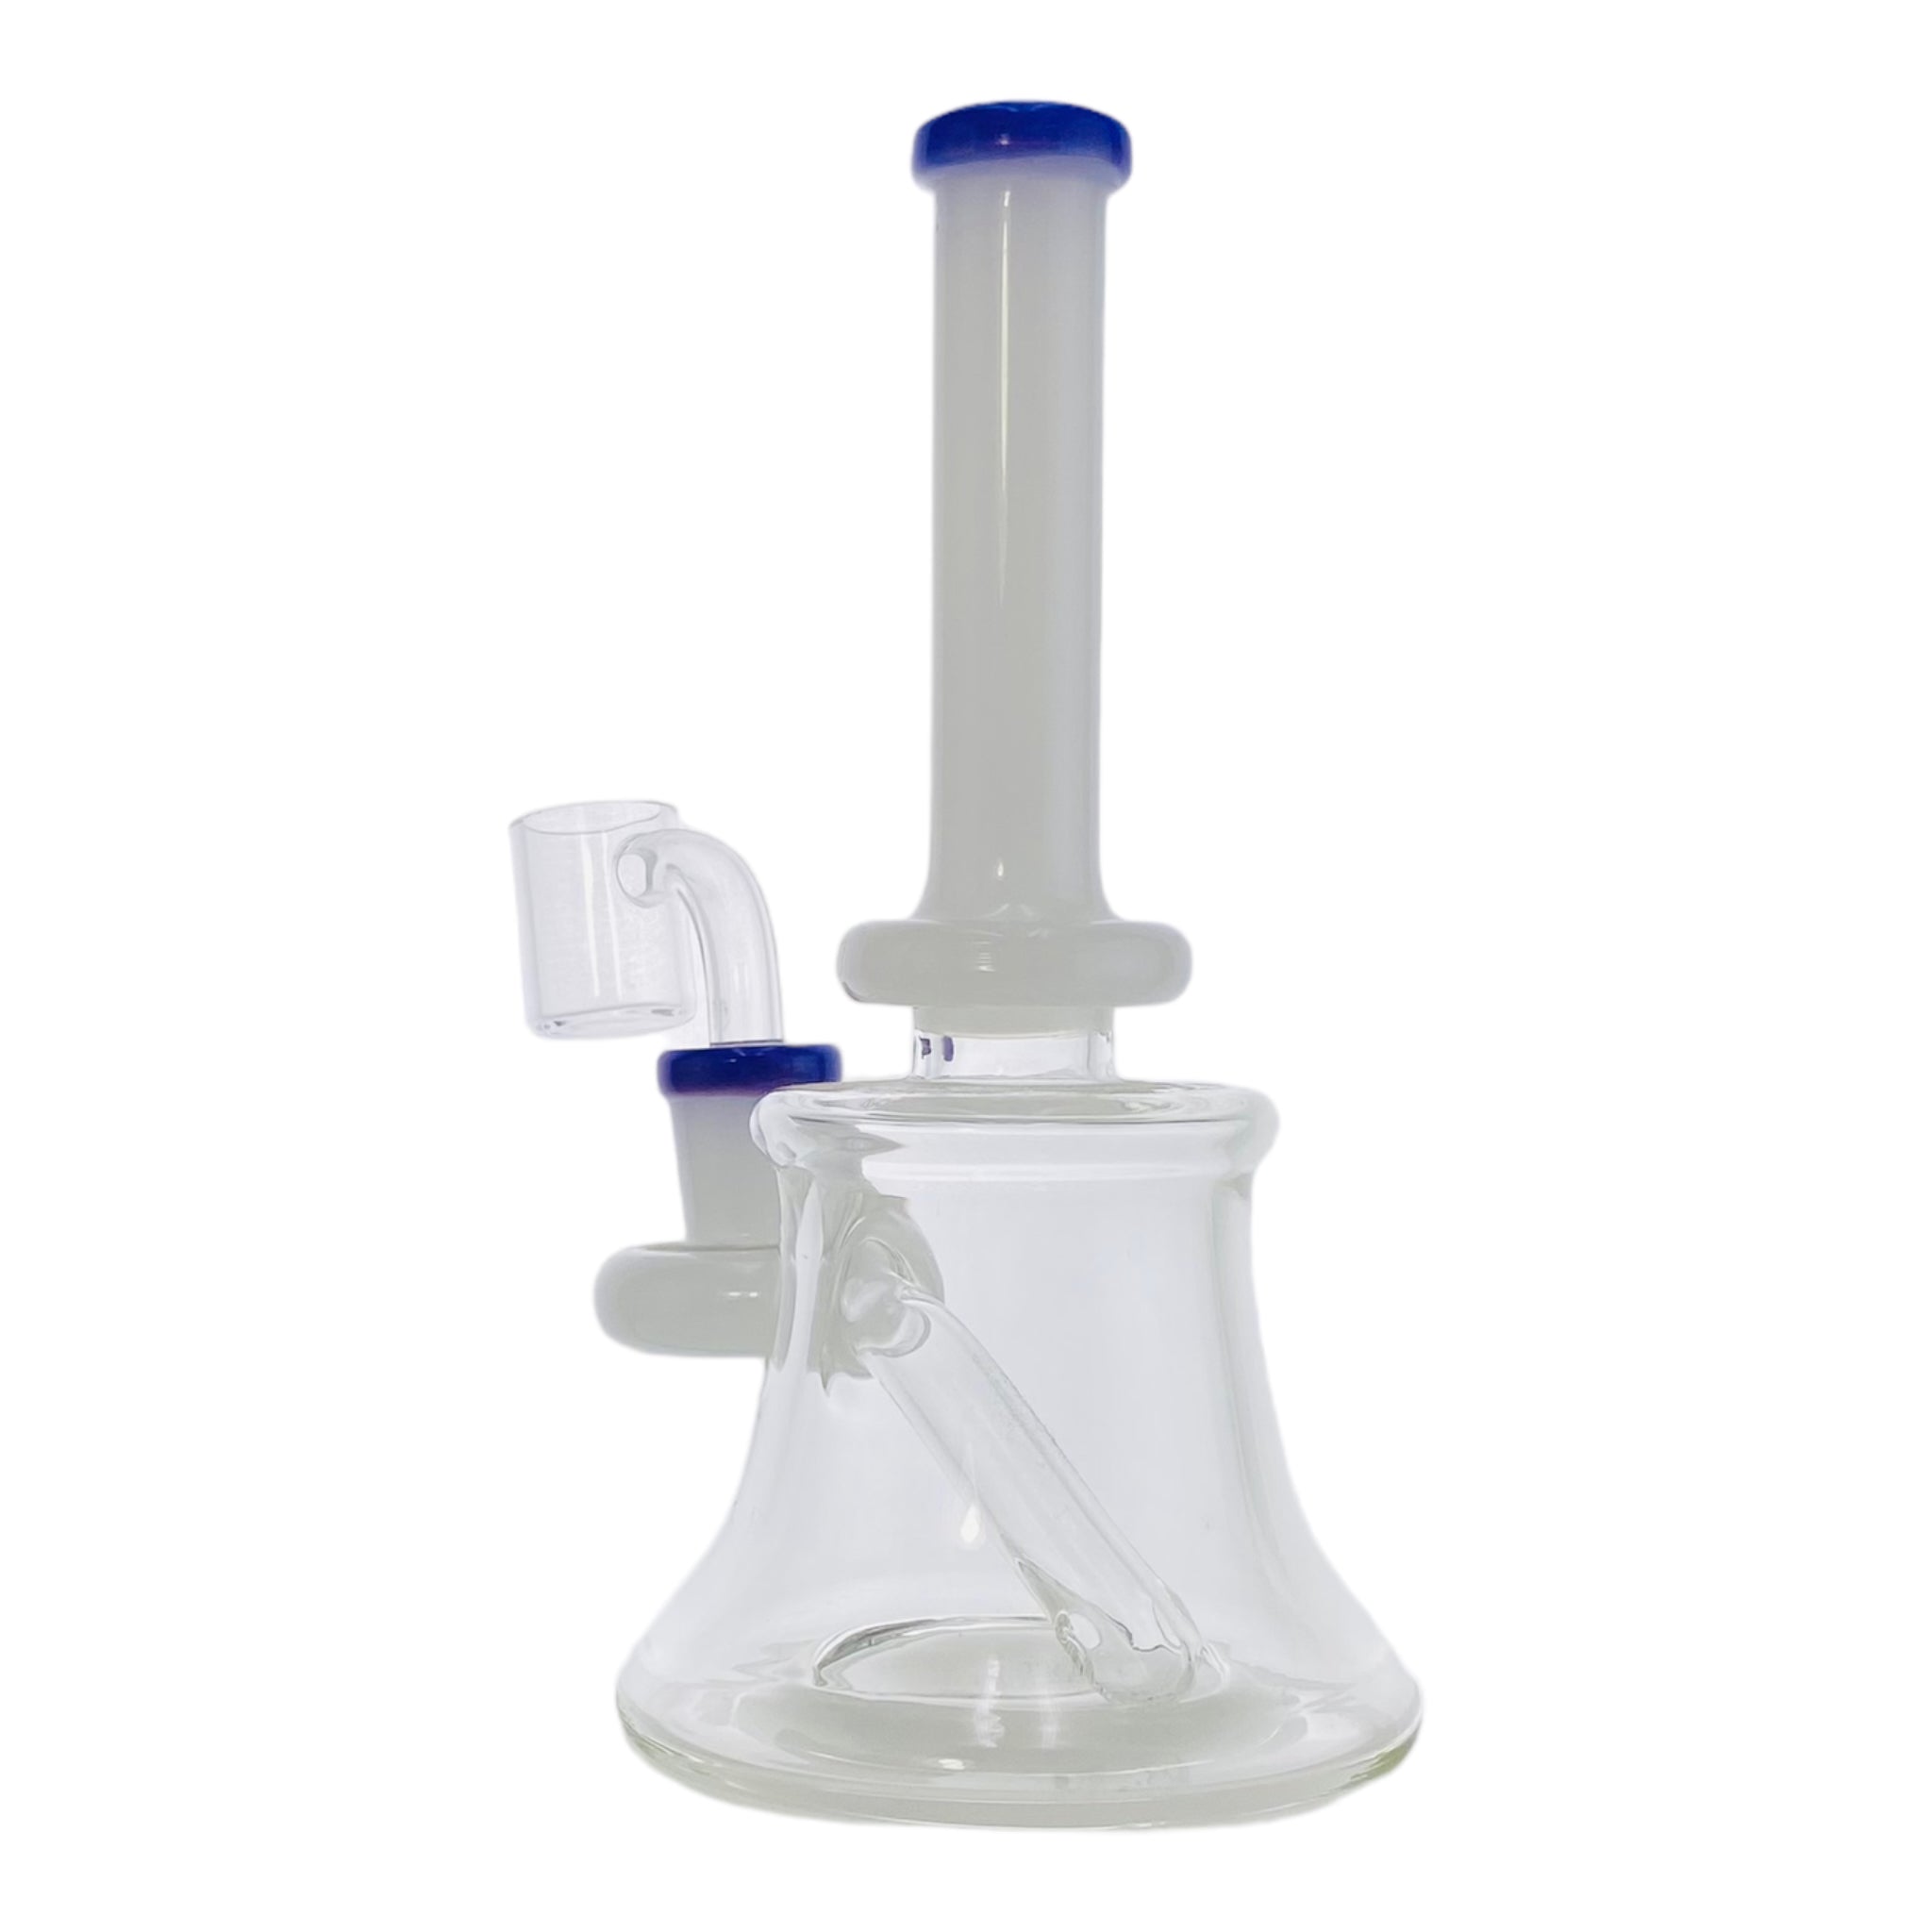 This mini tube dab rig features a white neck and fitting with a stunning purple trim. It stands 7" tall and includes a 14mm banger hanger fitting and 14mm quartz banger, making it ideal for both wax and oil concentrates